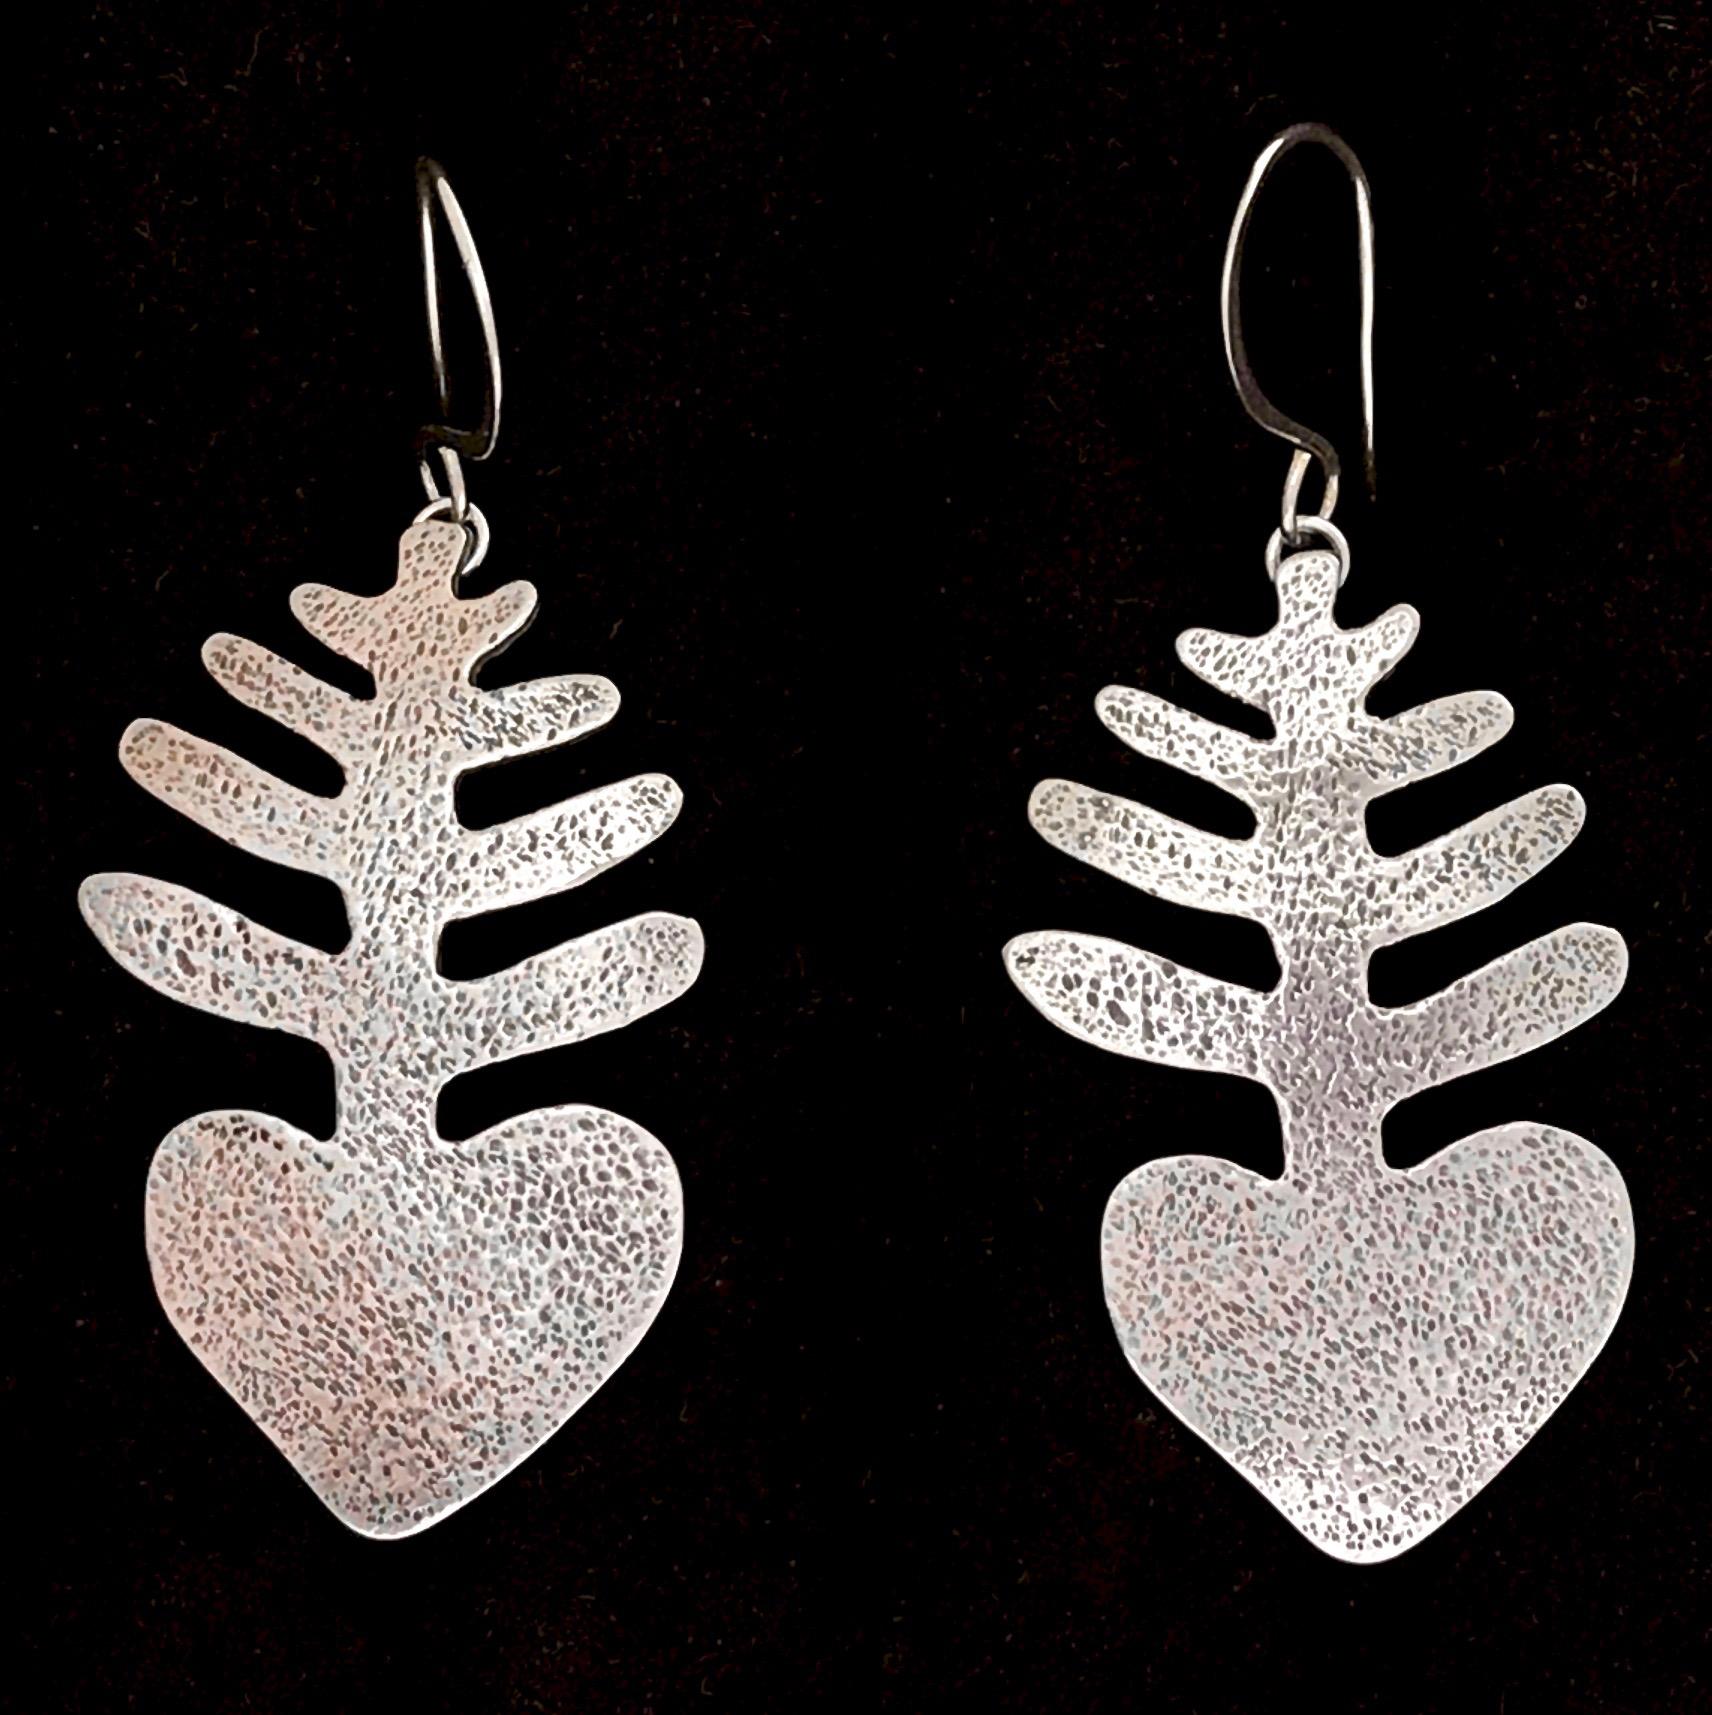 Heart Plant Earrings, dangle silver cast earrings Melanie Yazzie Heart plant 
Length of earrings are measured from the top of the earring wire to the bottom of the silver earring. The weight is the combined total weight of the pair of